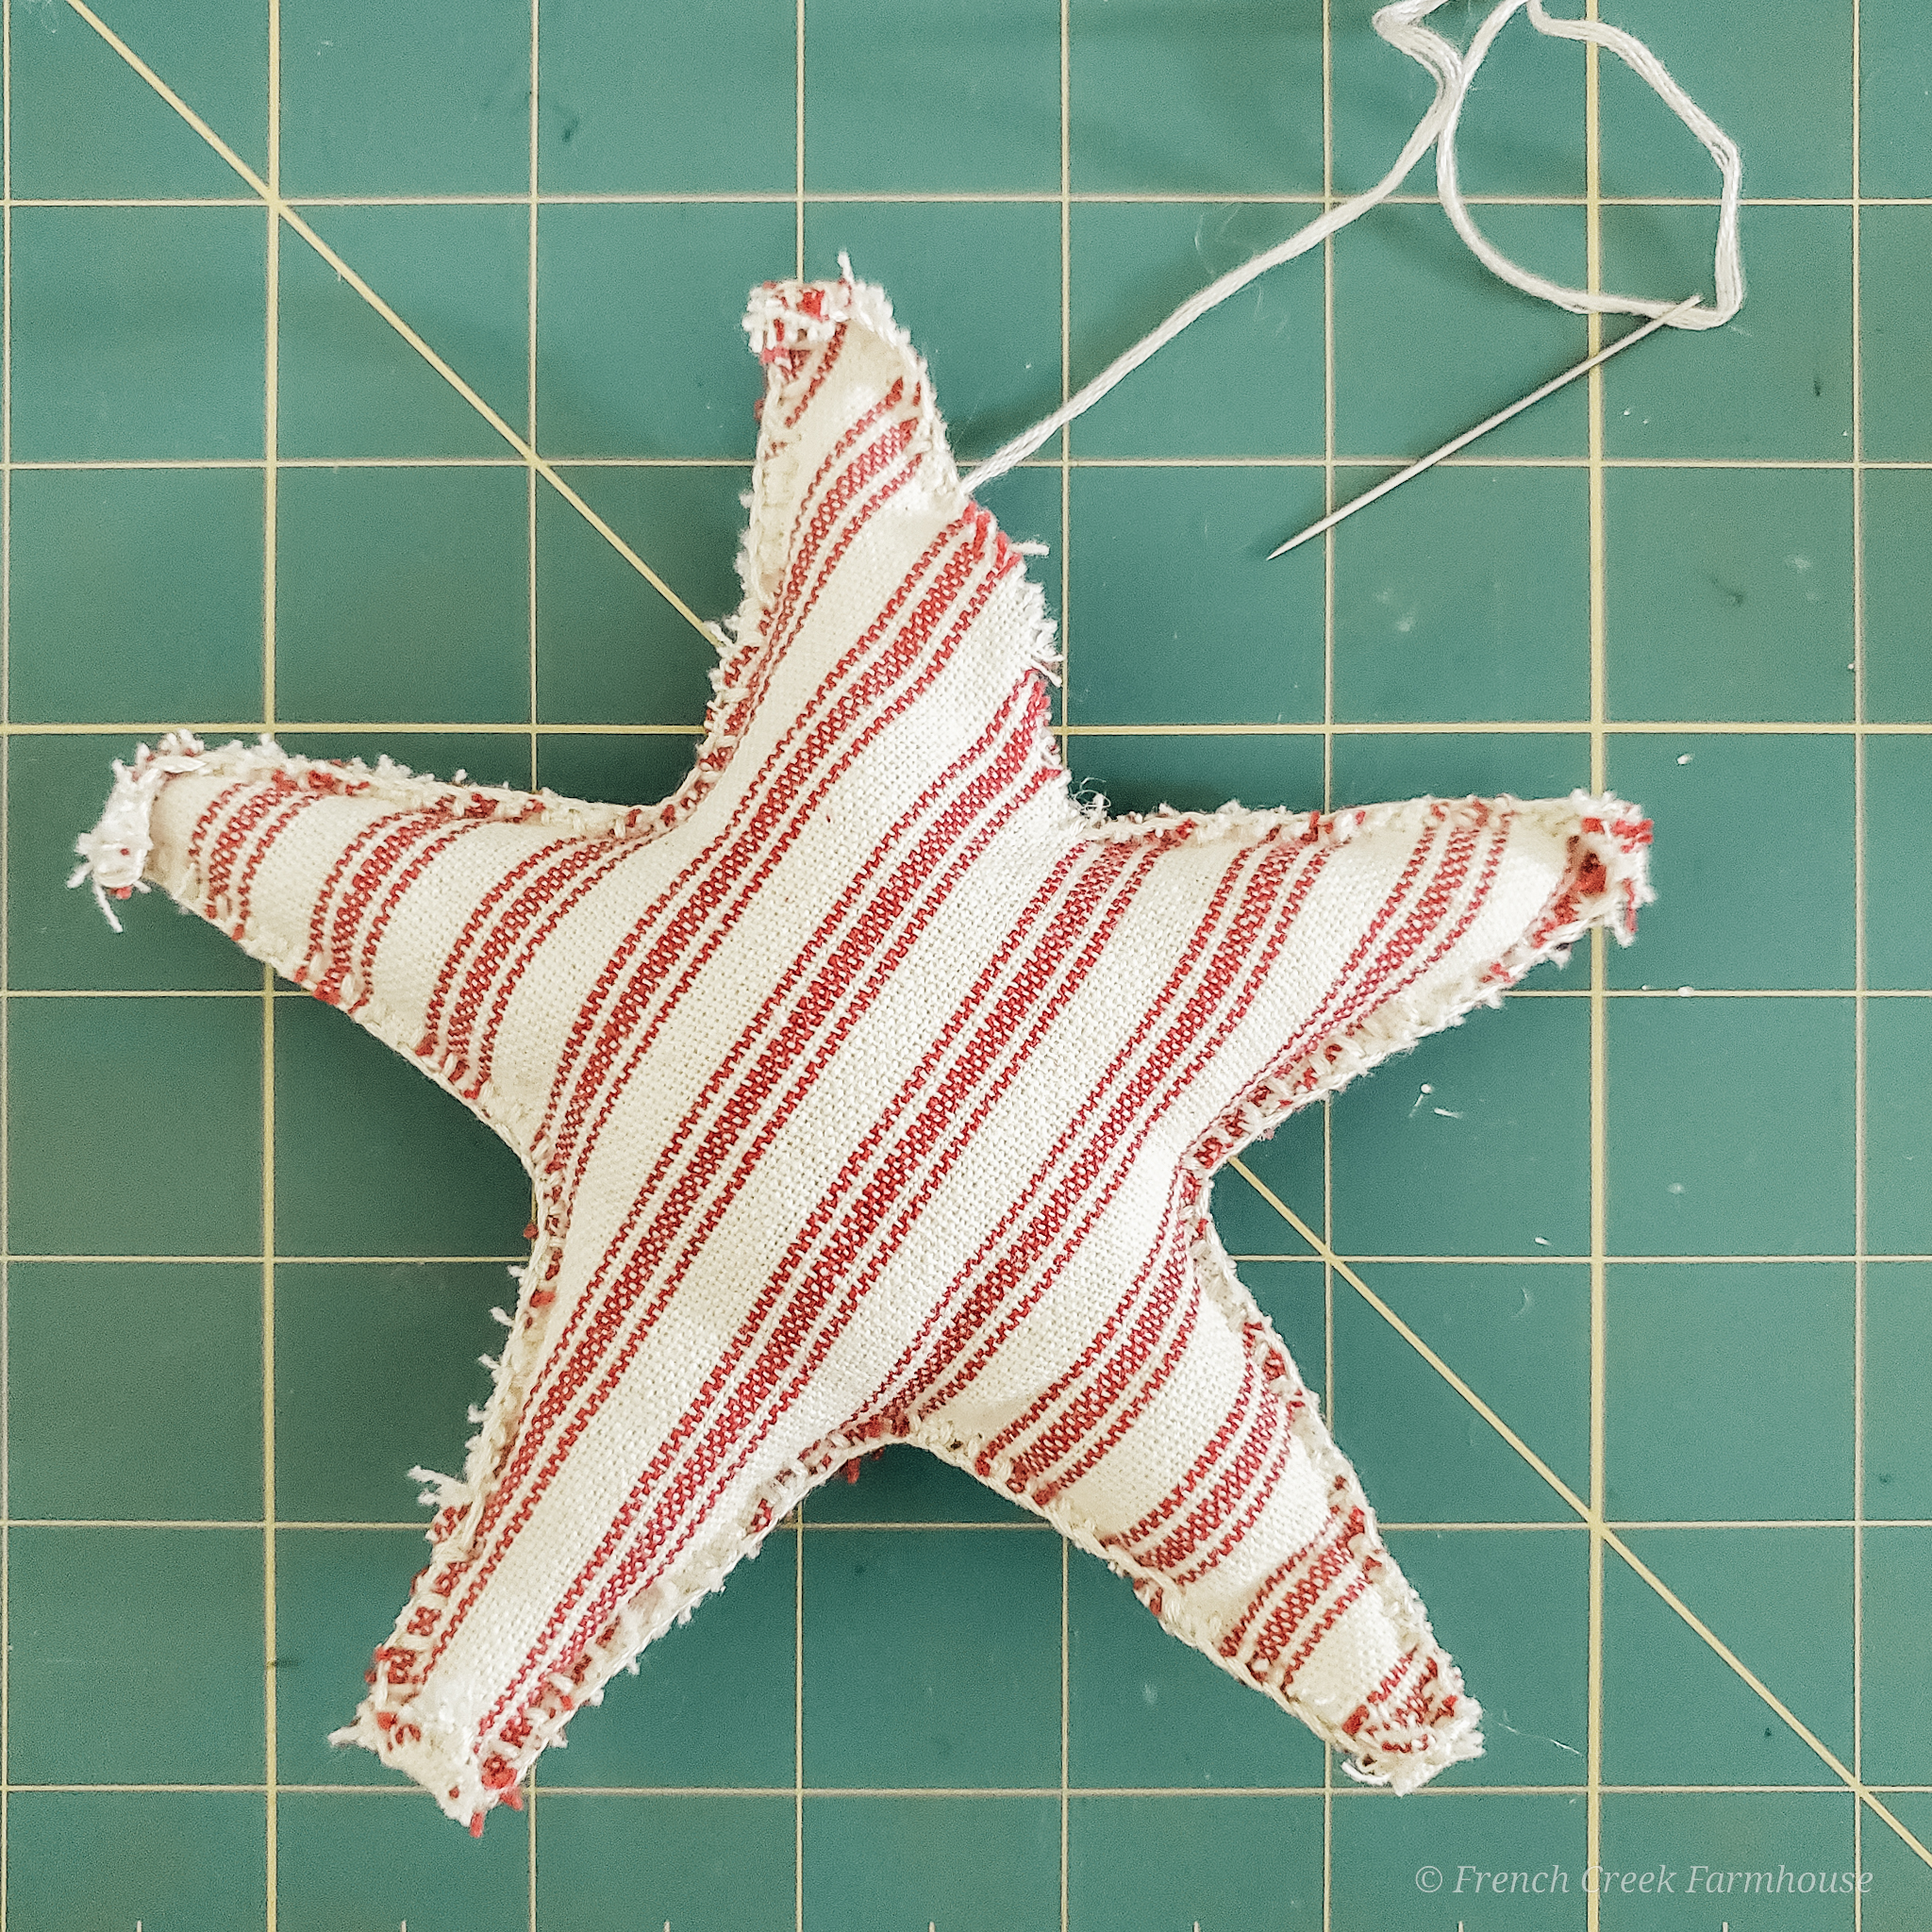 No sewing machine required for this easy DIY craft